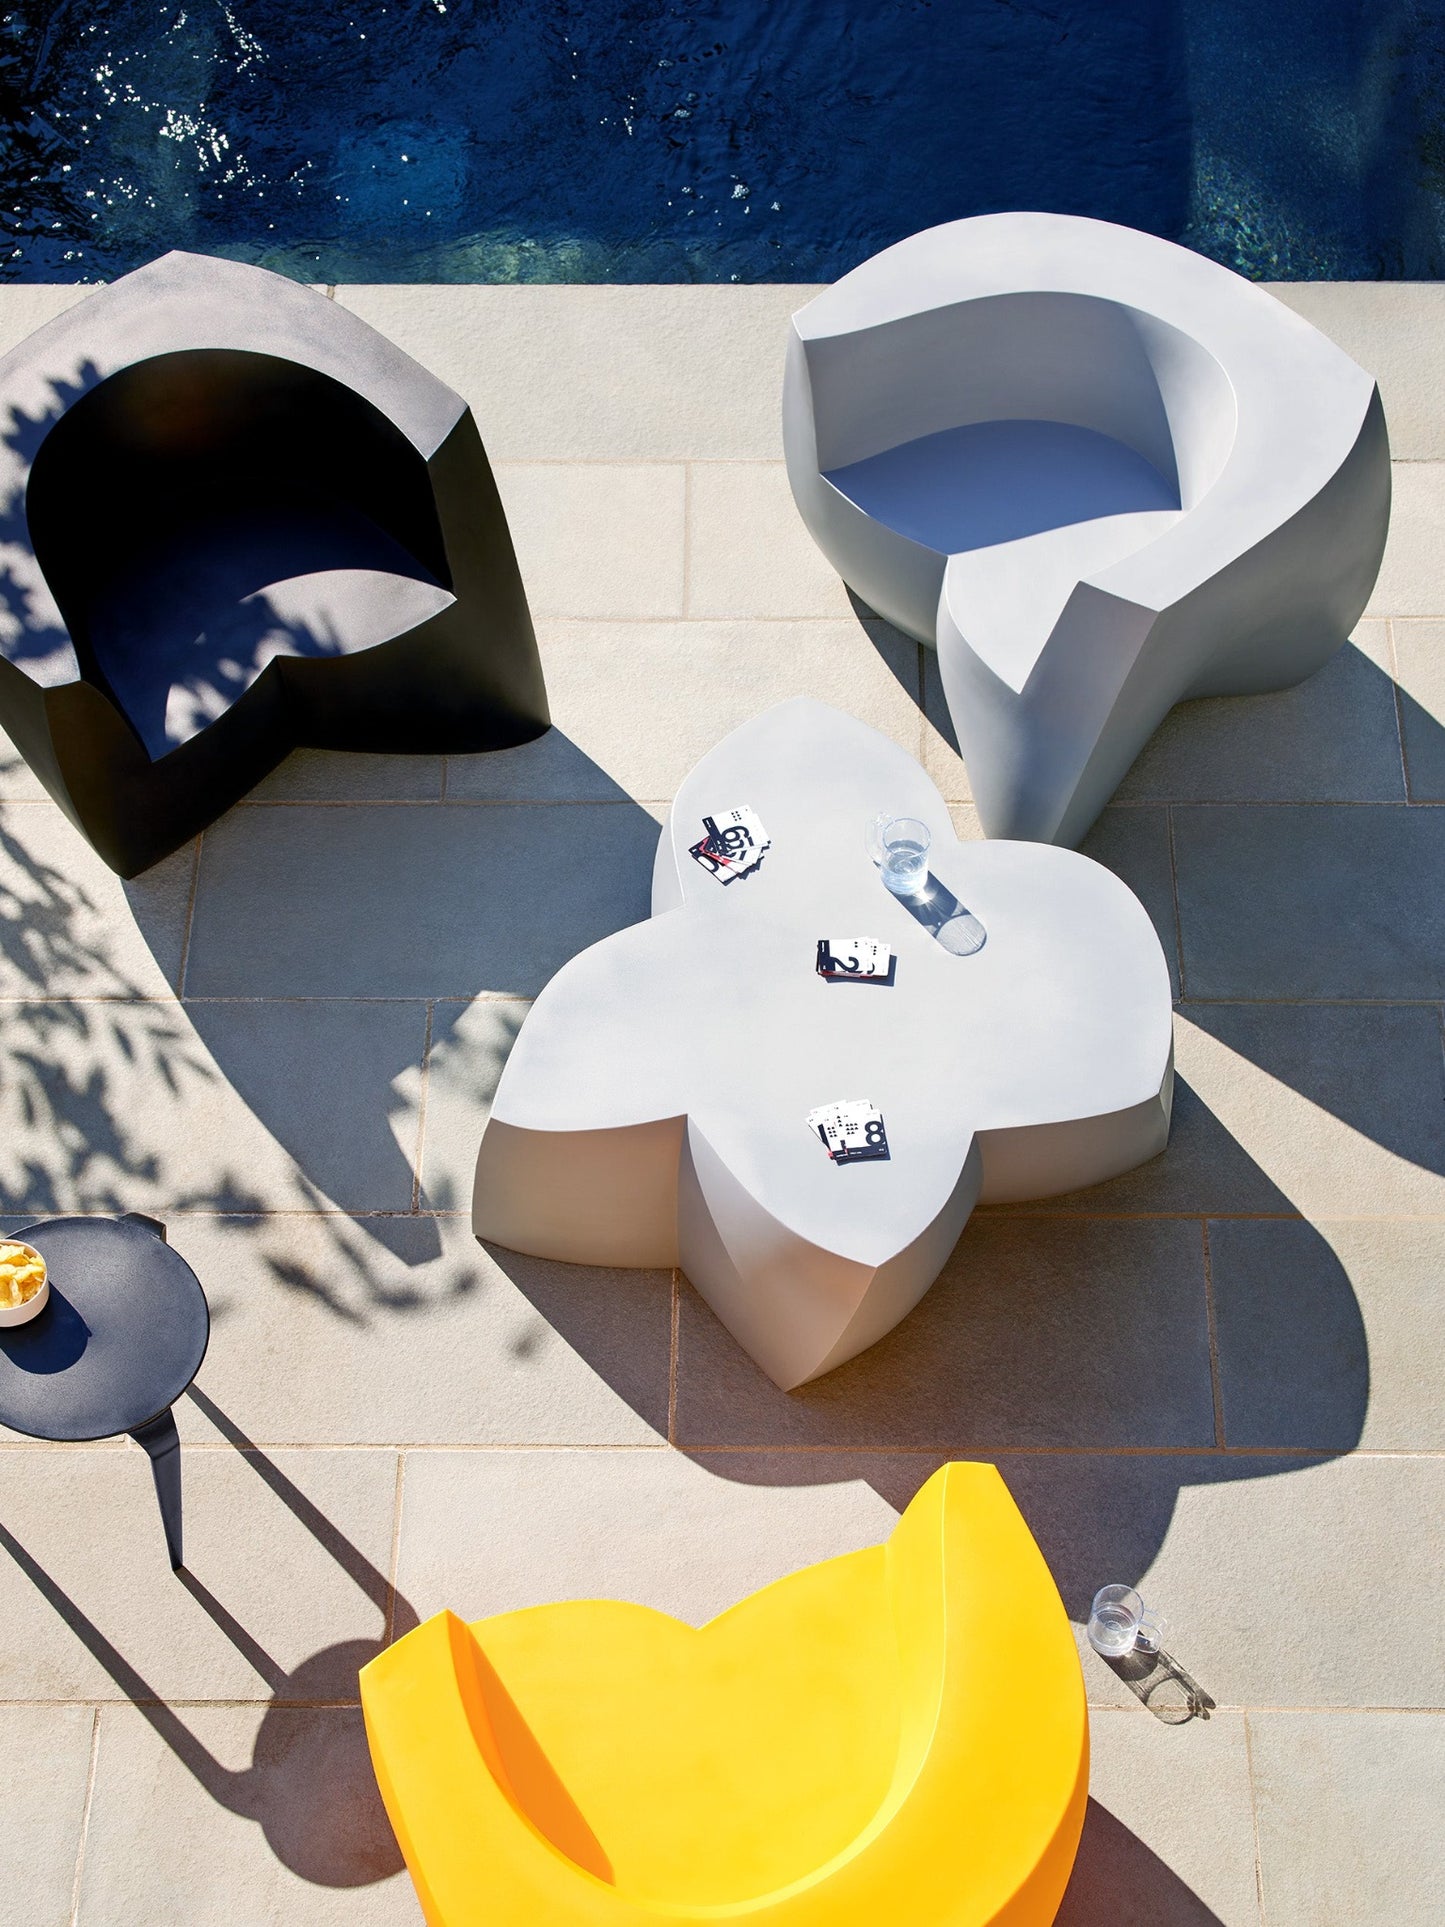 Three sculptural Frank Gehry Easy Chairs, A Frank Gehry Coffee Table and a Tavollini by the pool.